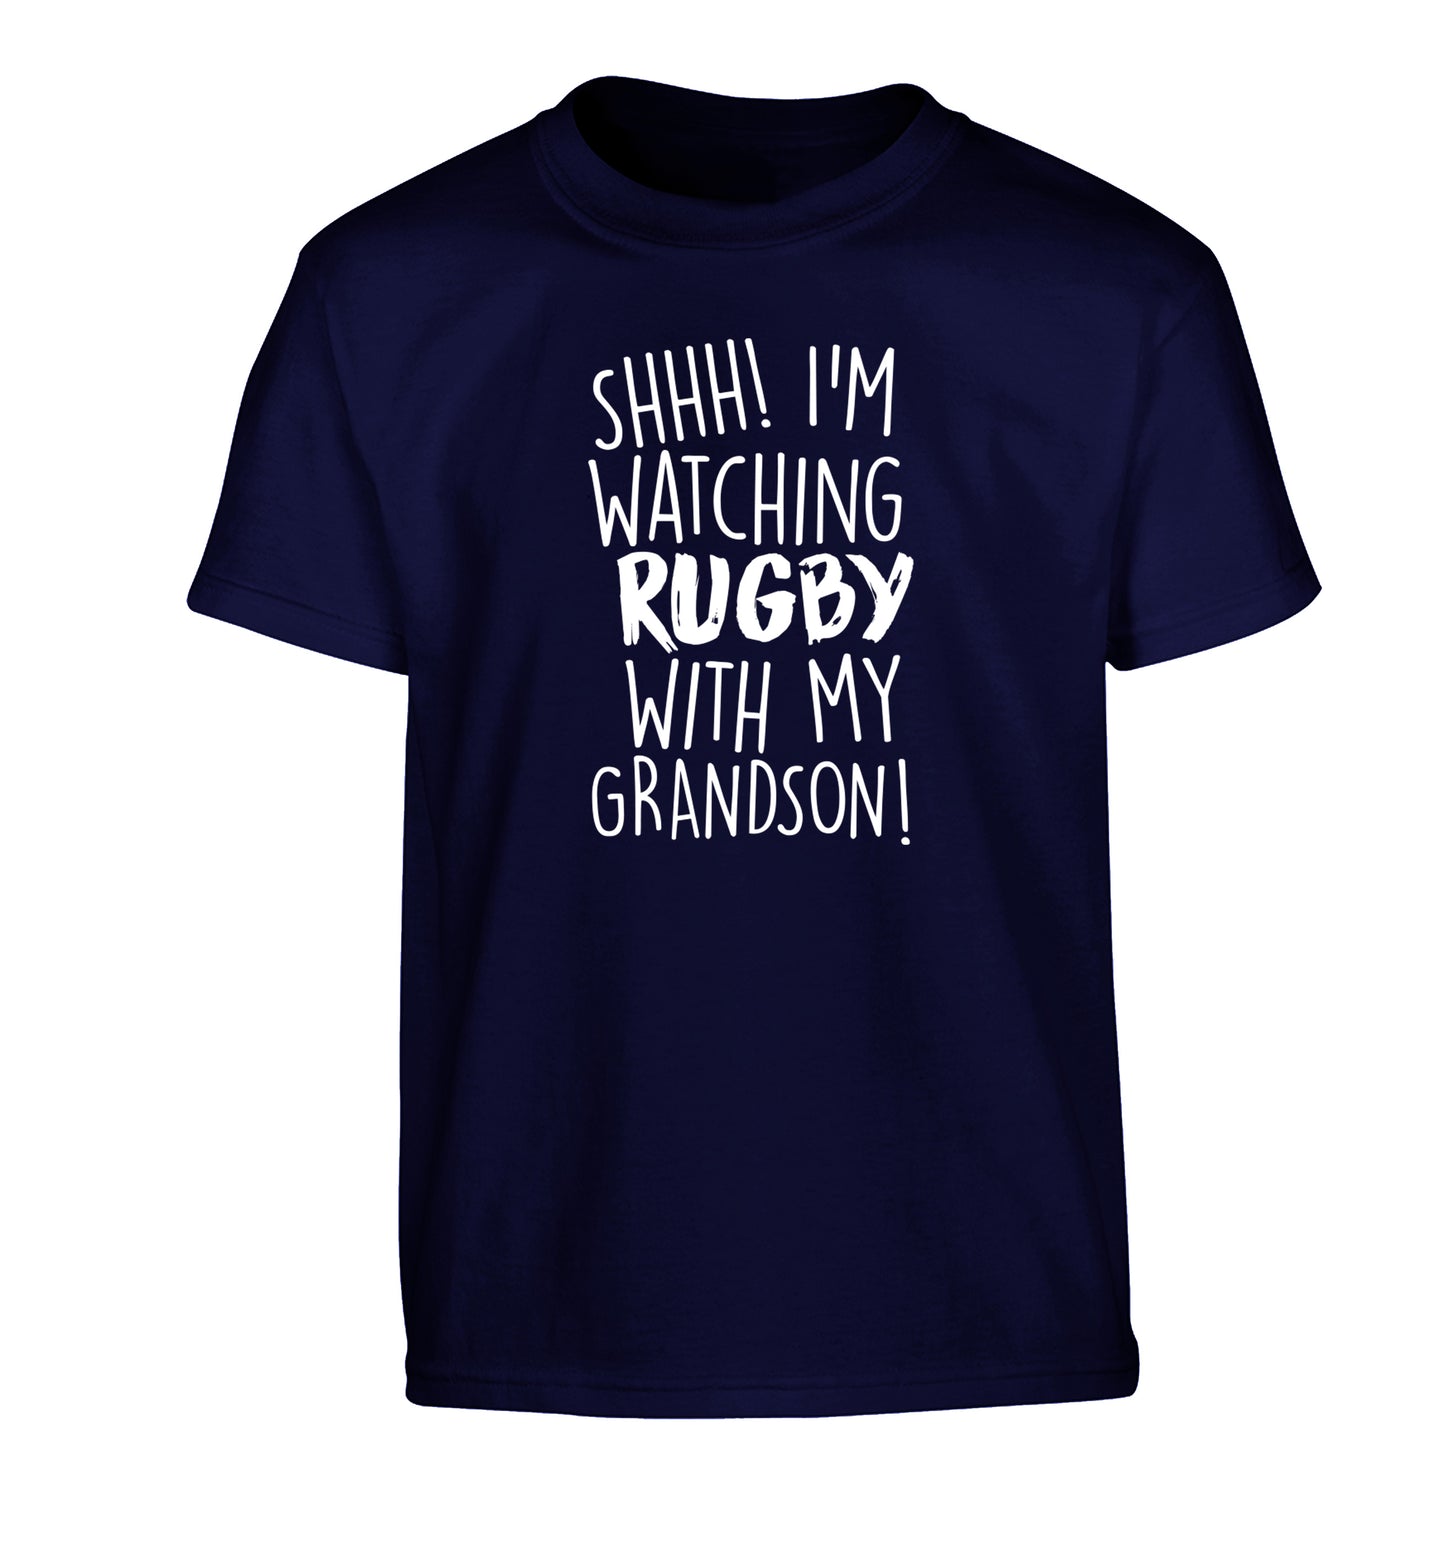 Shh I'm watching rugby with my grandson Children's navy Tshirt 12-13 Years